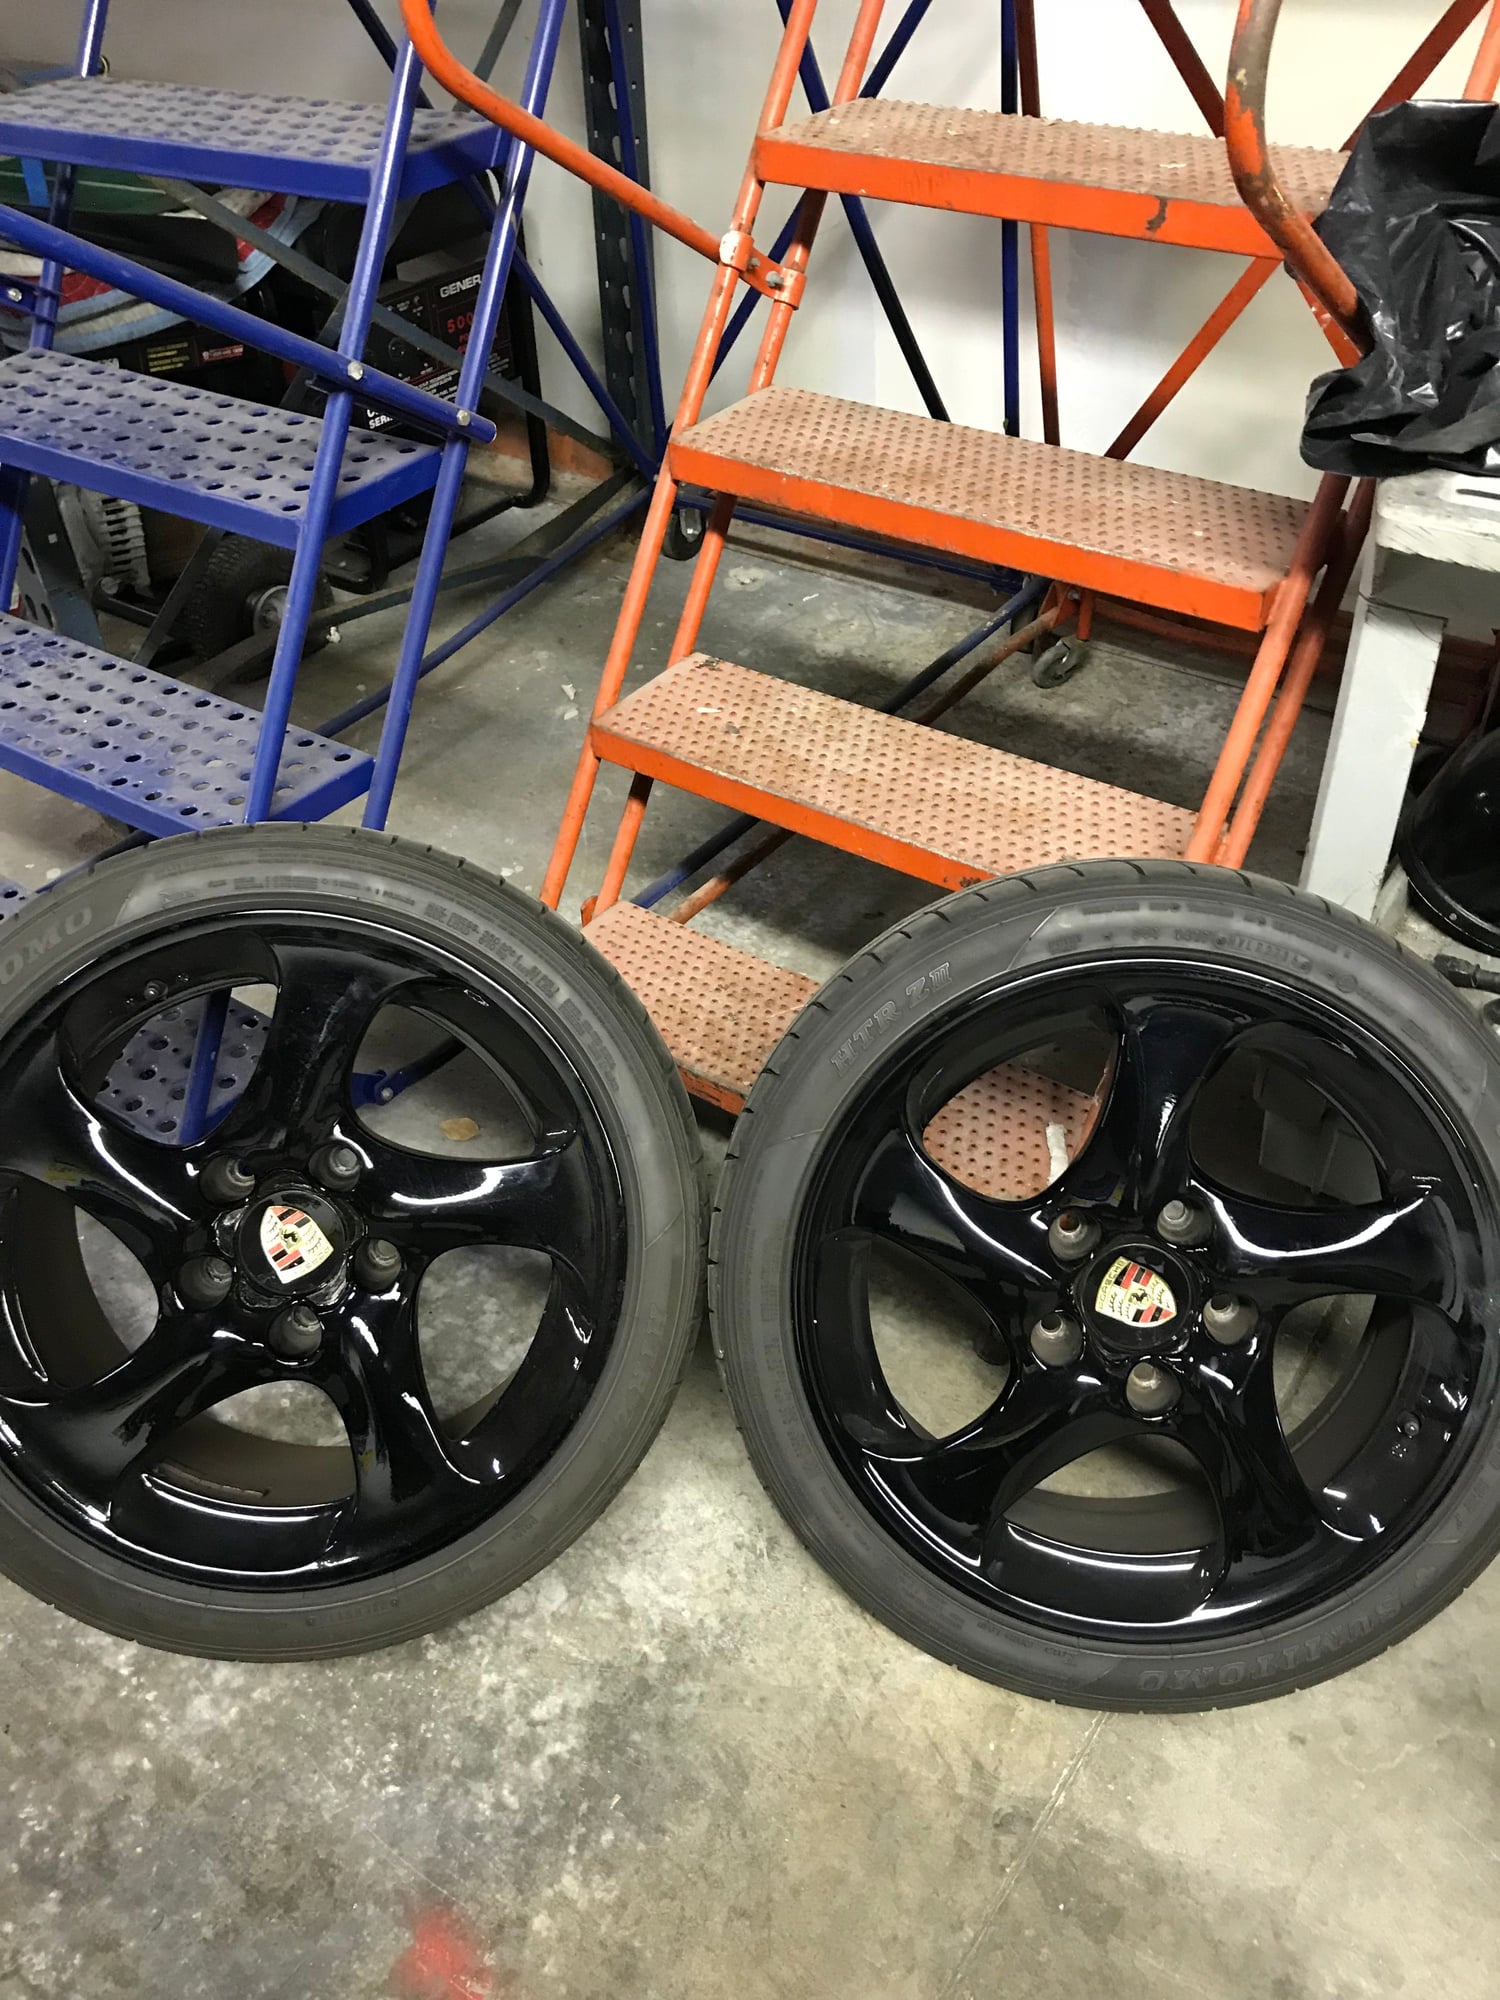 Wheels and Tires/Axles - Black Turbo Twist solid spoke wheels off 996 C4S with good Sumitomo tires - Used - 2002 to 2005 Porsche Carrera - Miami, FL 33169, United States